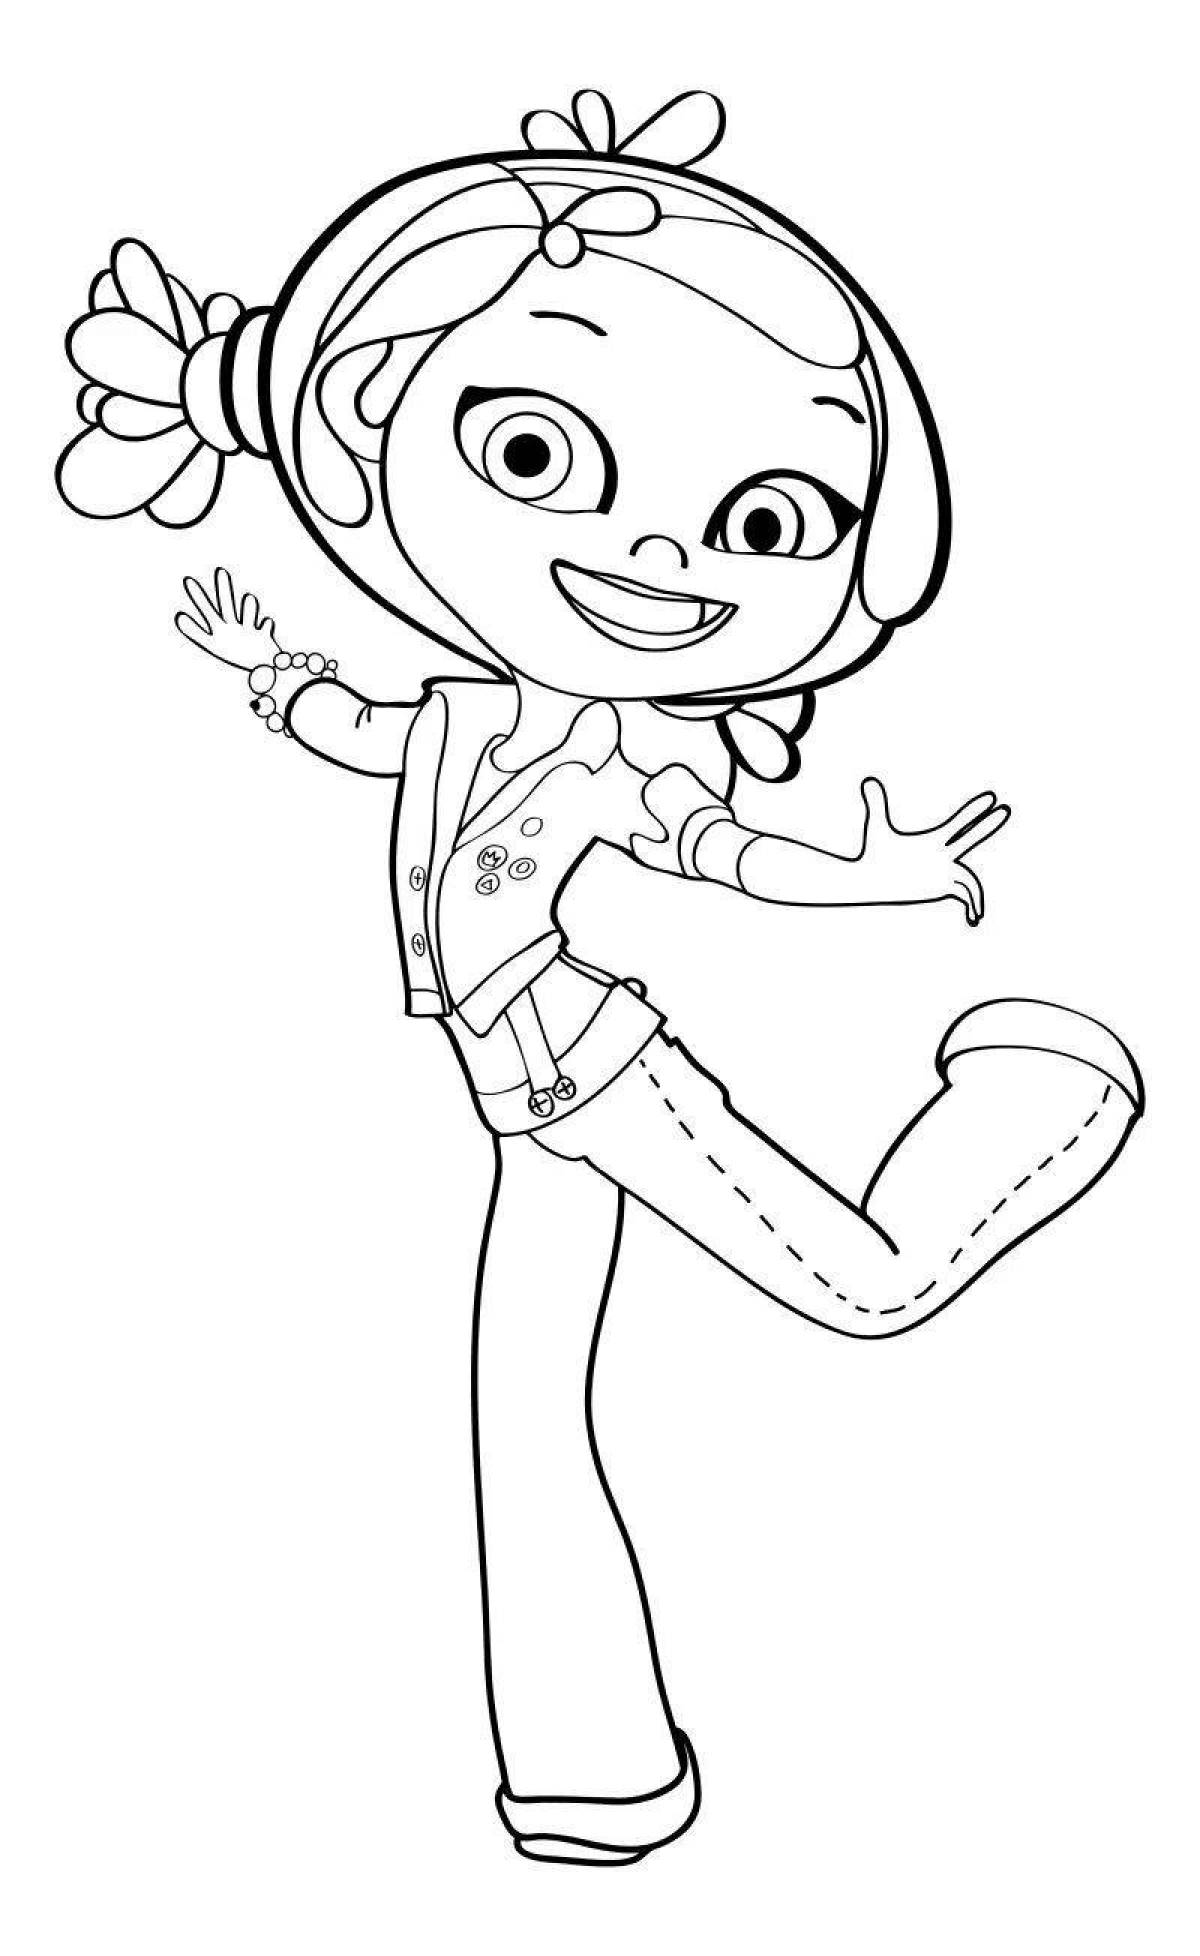 Great coloring book turn on fairy patrol